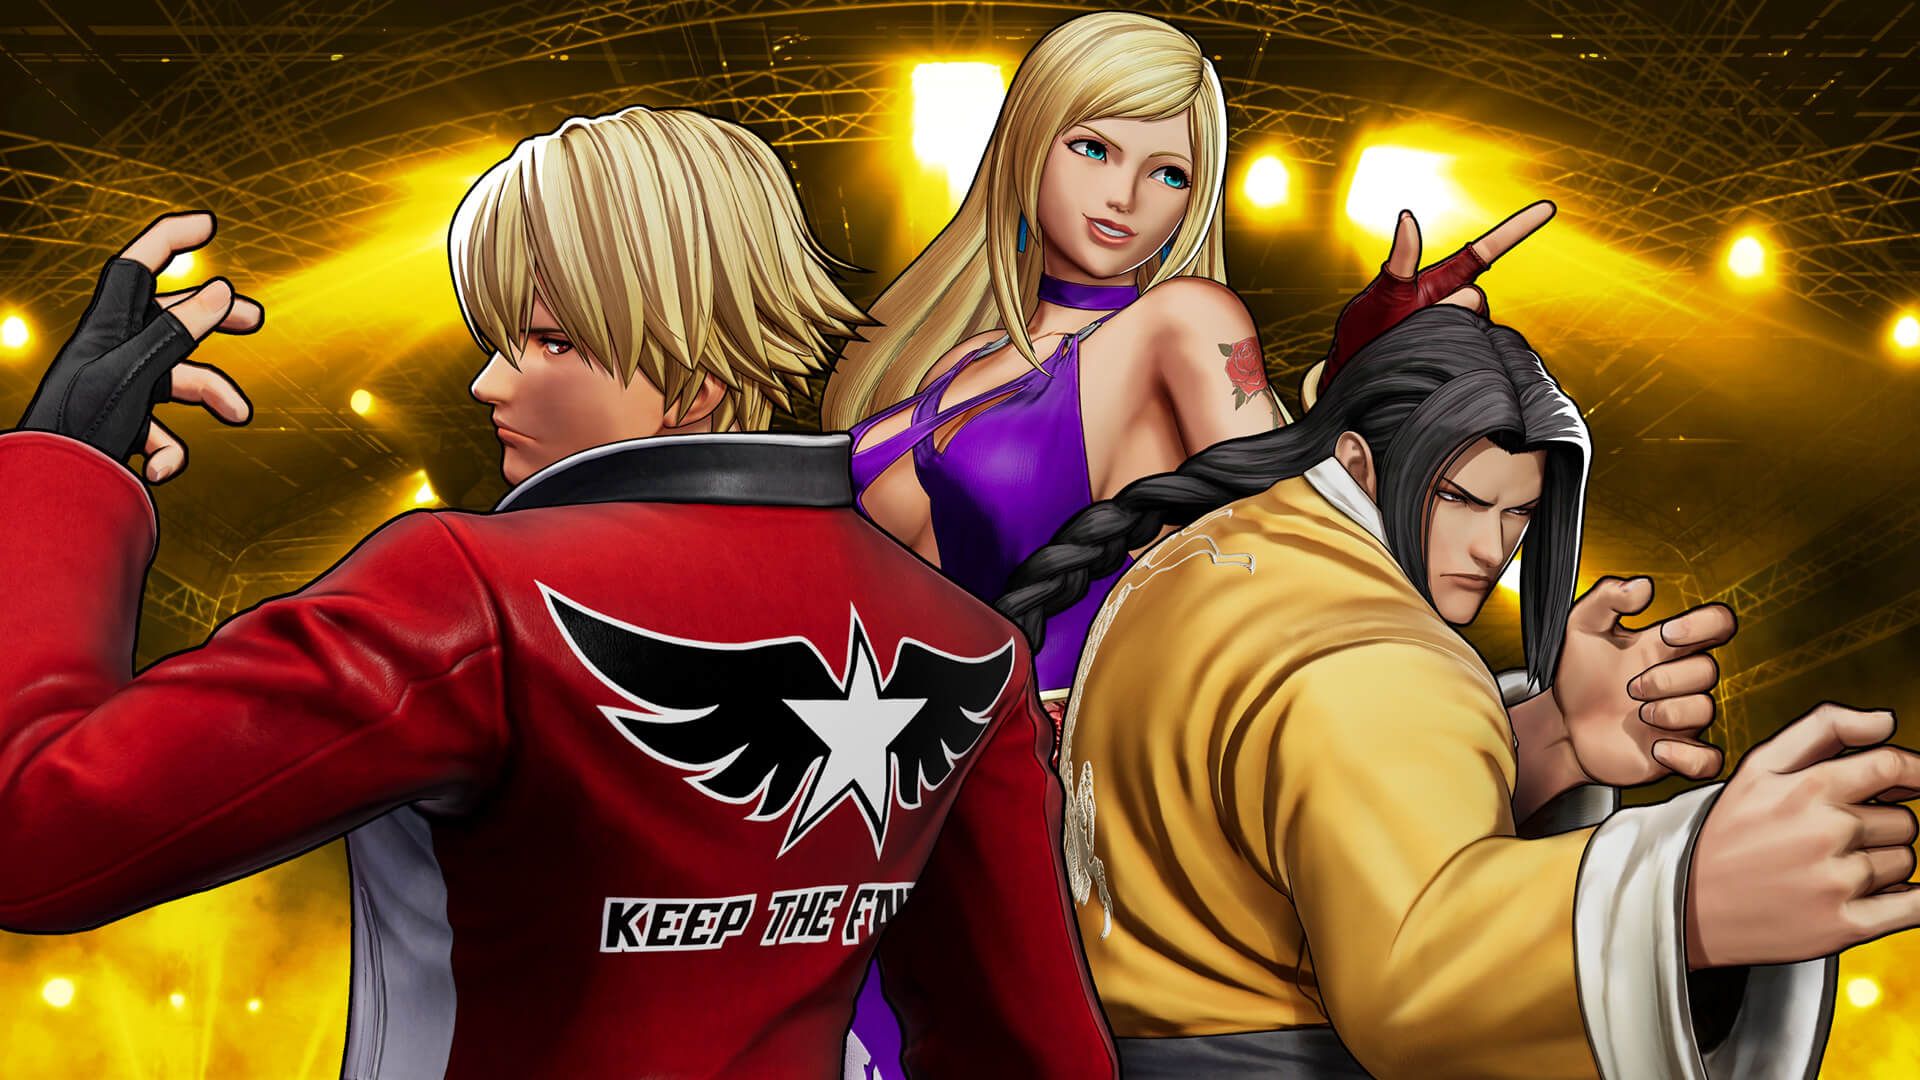 First DLC Team For King of Fighters XV Is Released